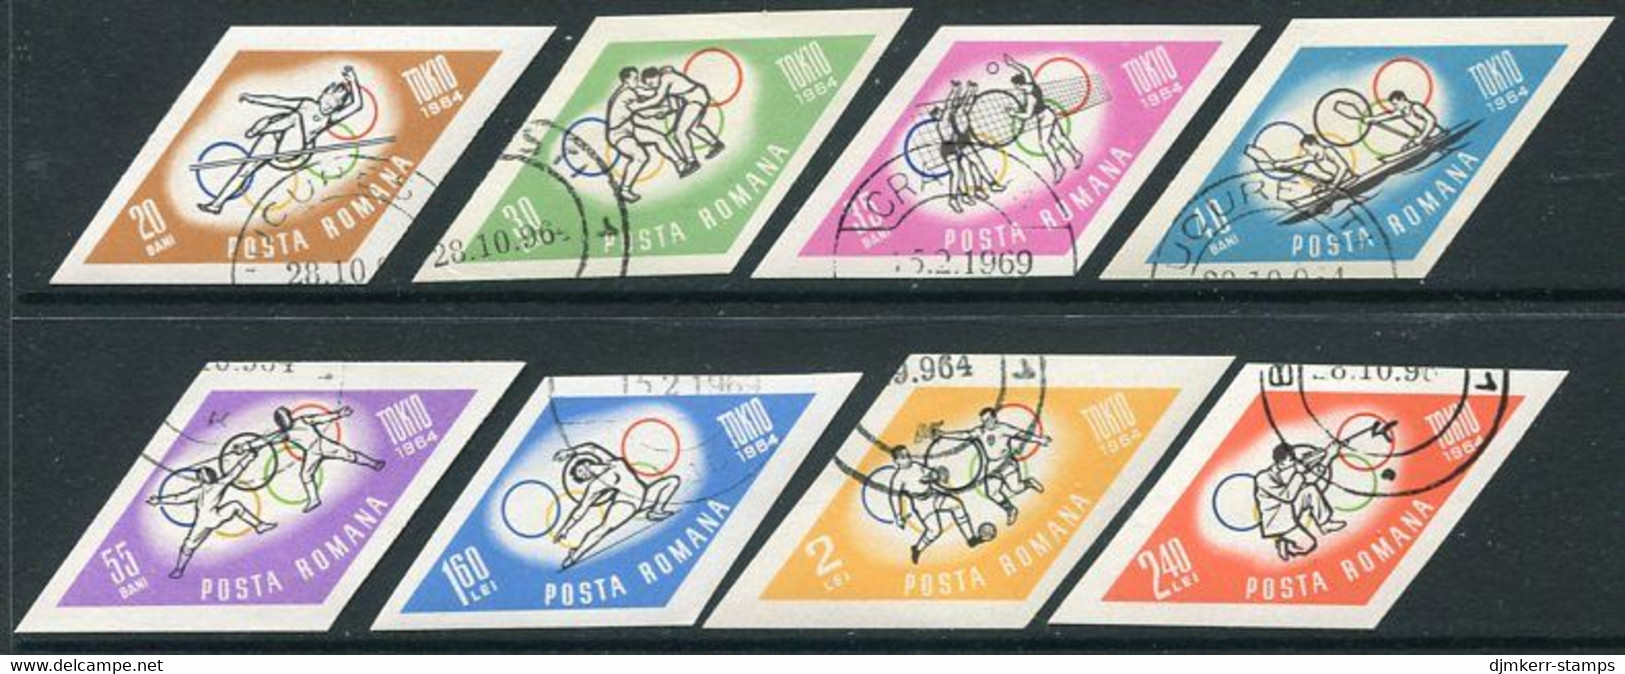 ROMANIA 1964 Tokyo Olympic Games Imperforate Used.  Michel 2317-24 - Oblitérés